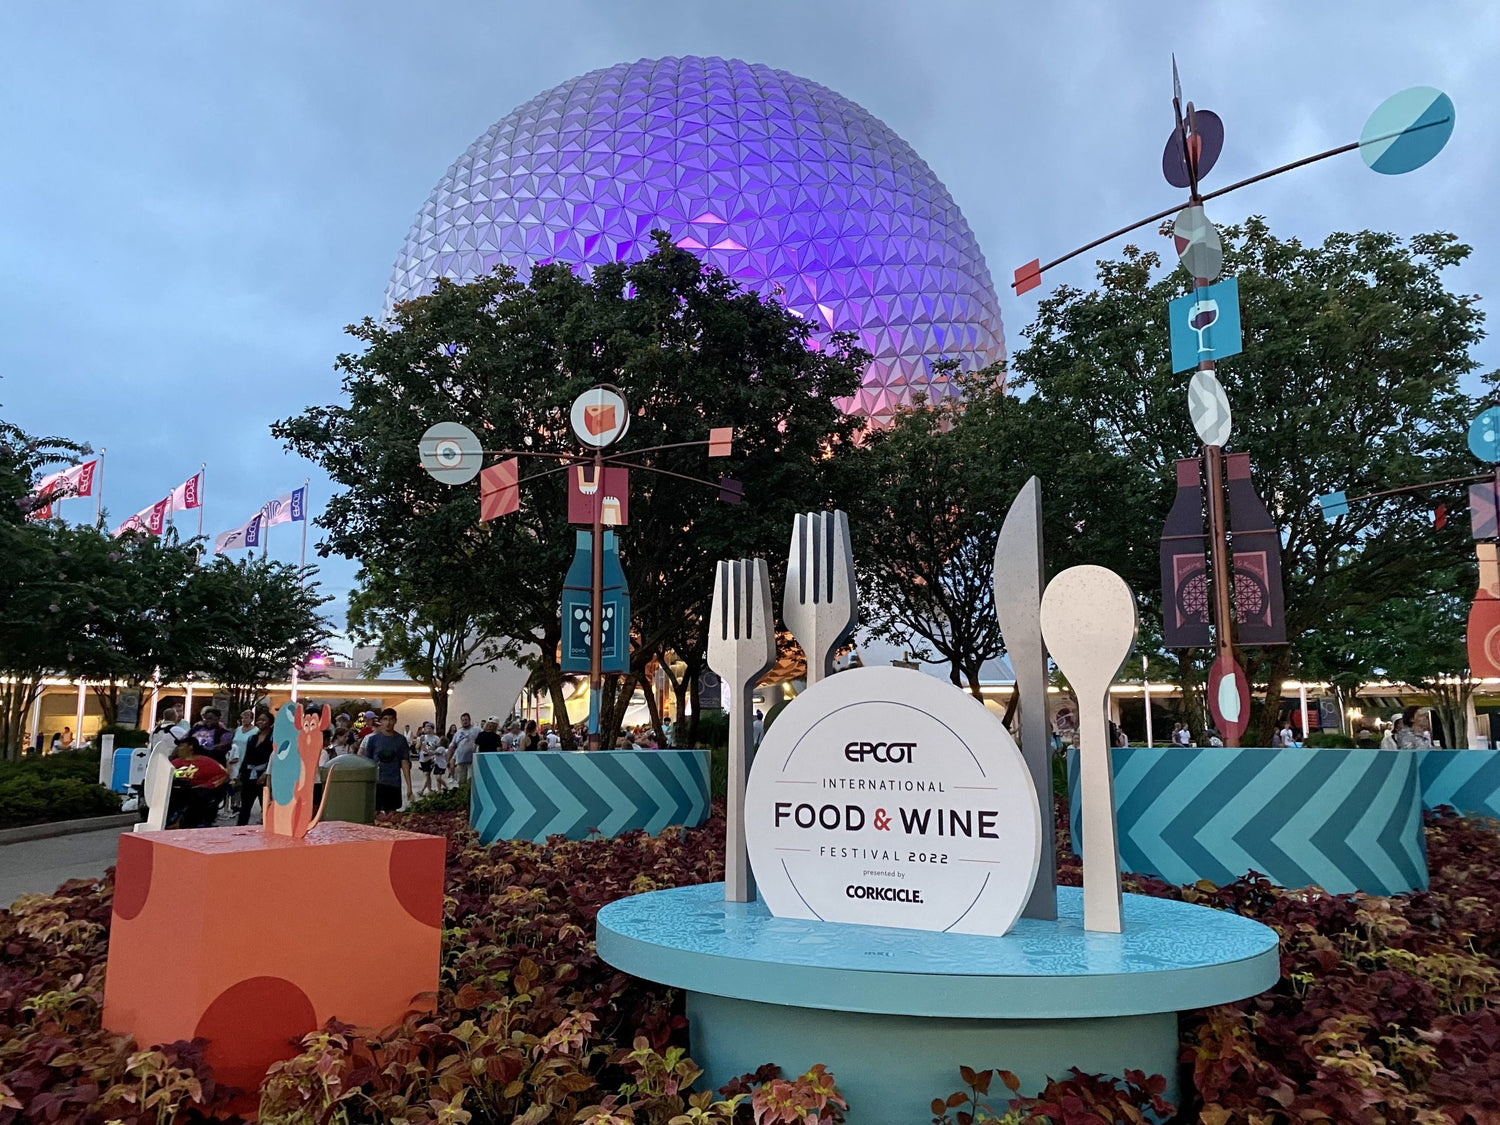 EPCOT's Food and Wine Festival